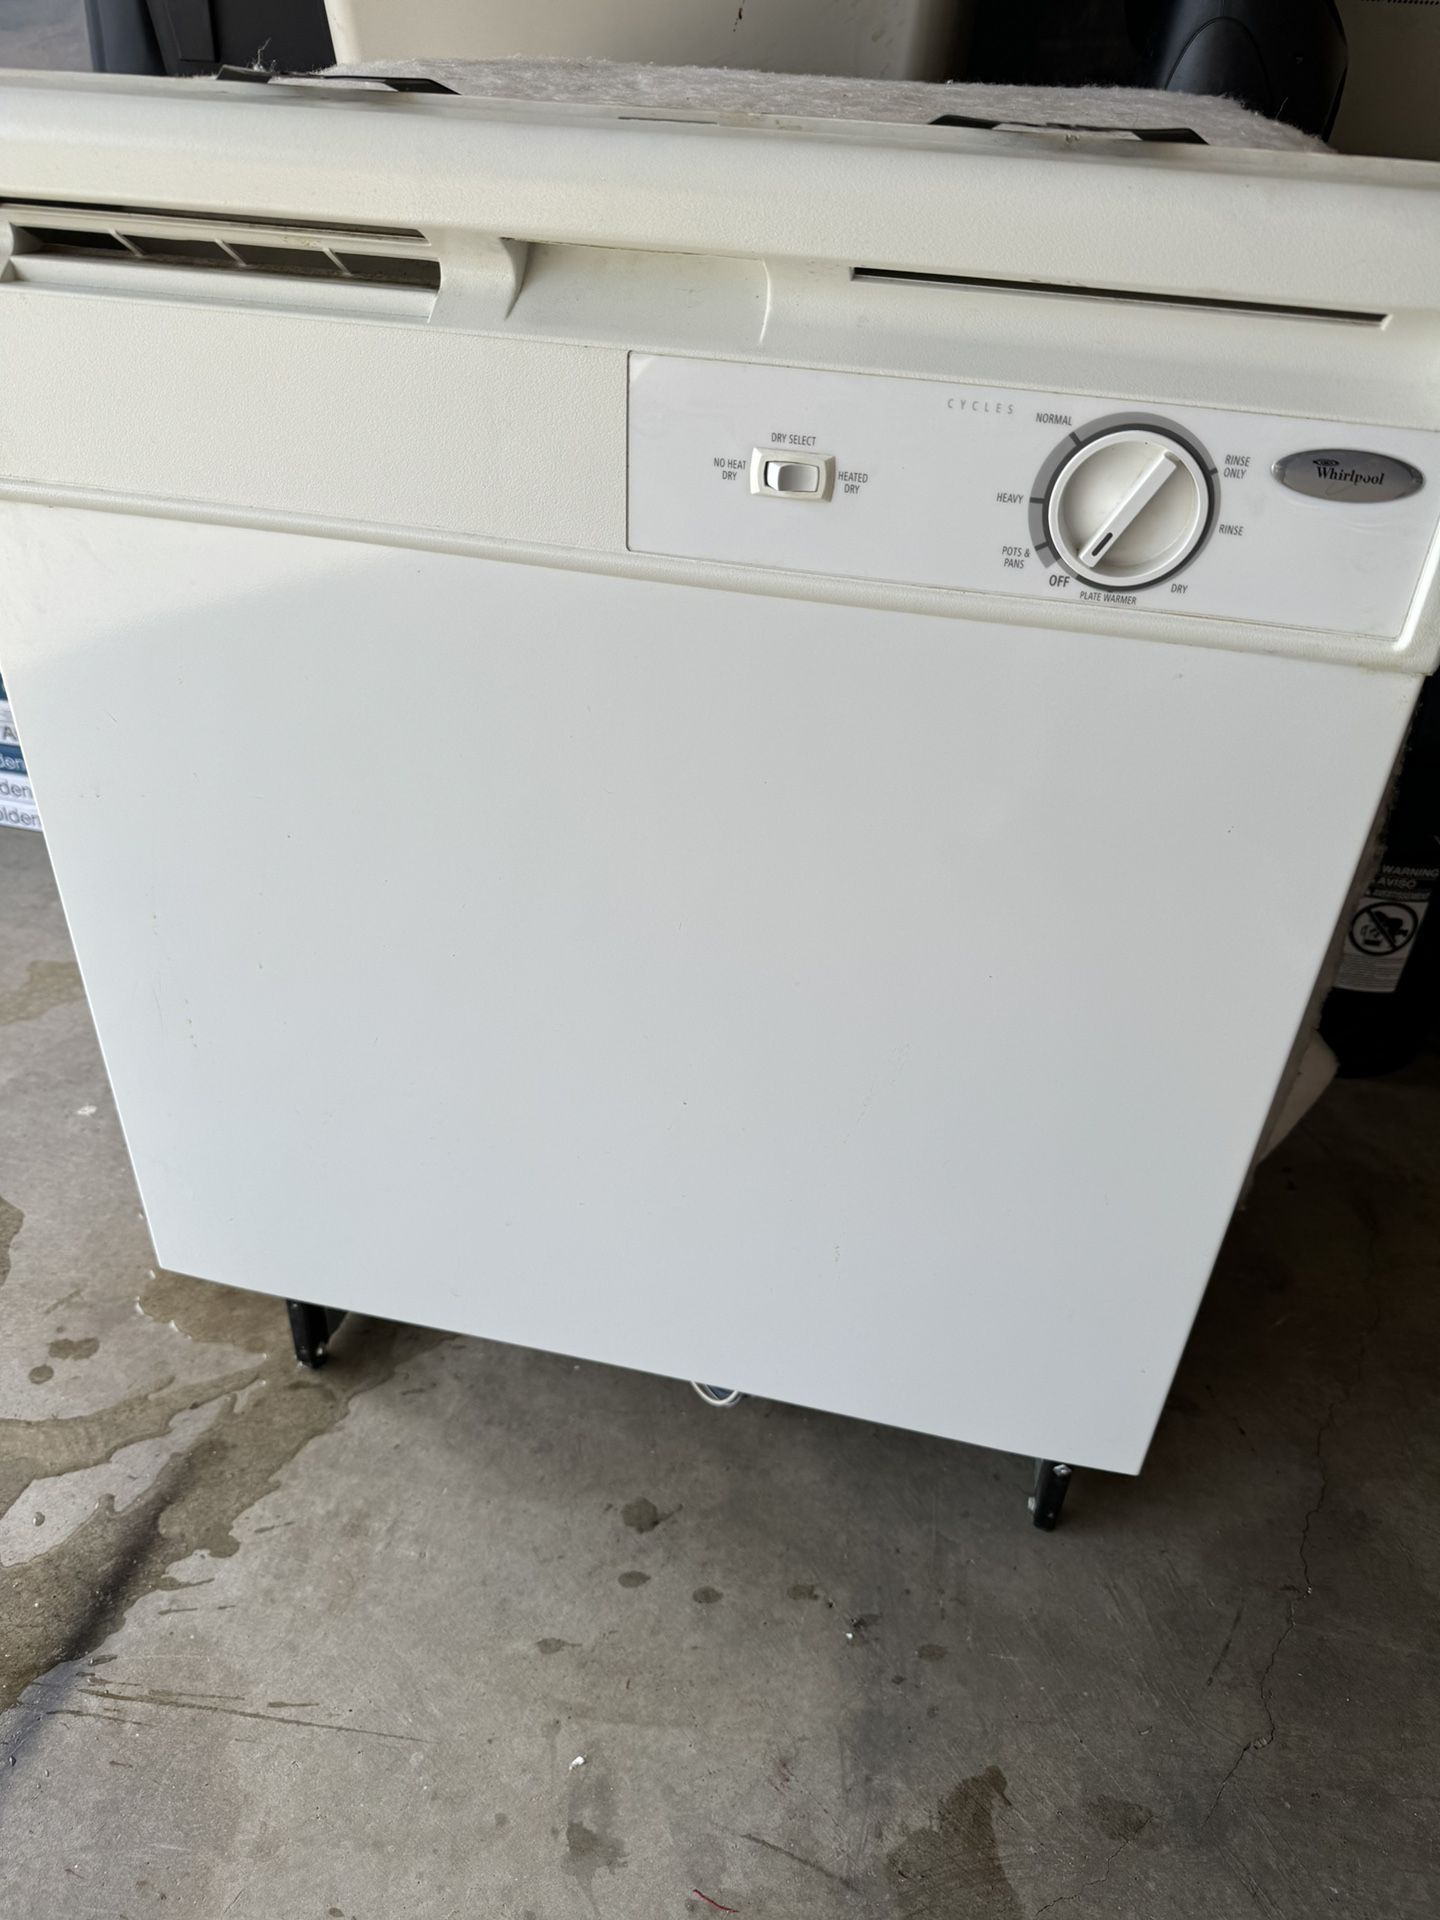 Whirpool dishwasher (Great condition)